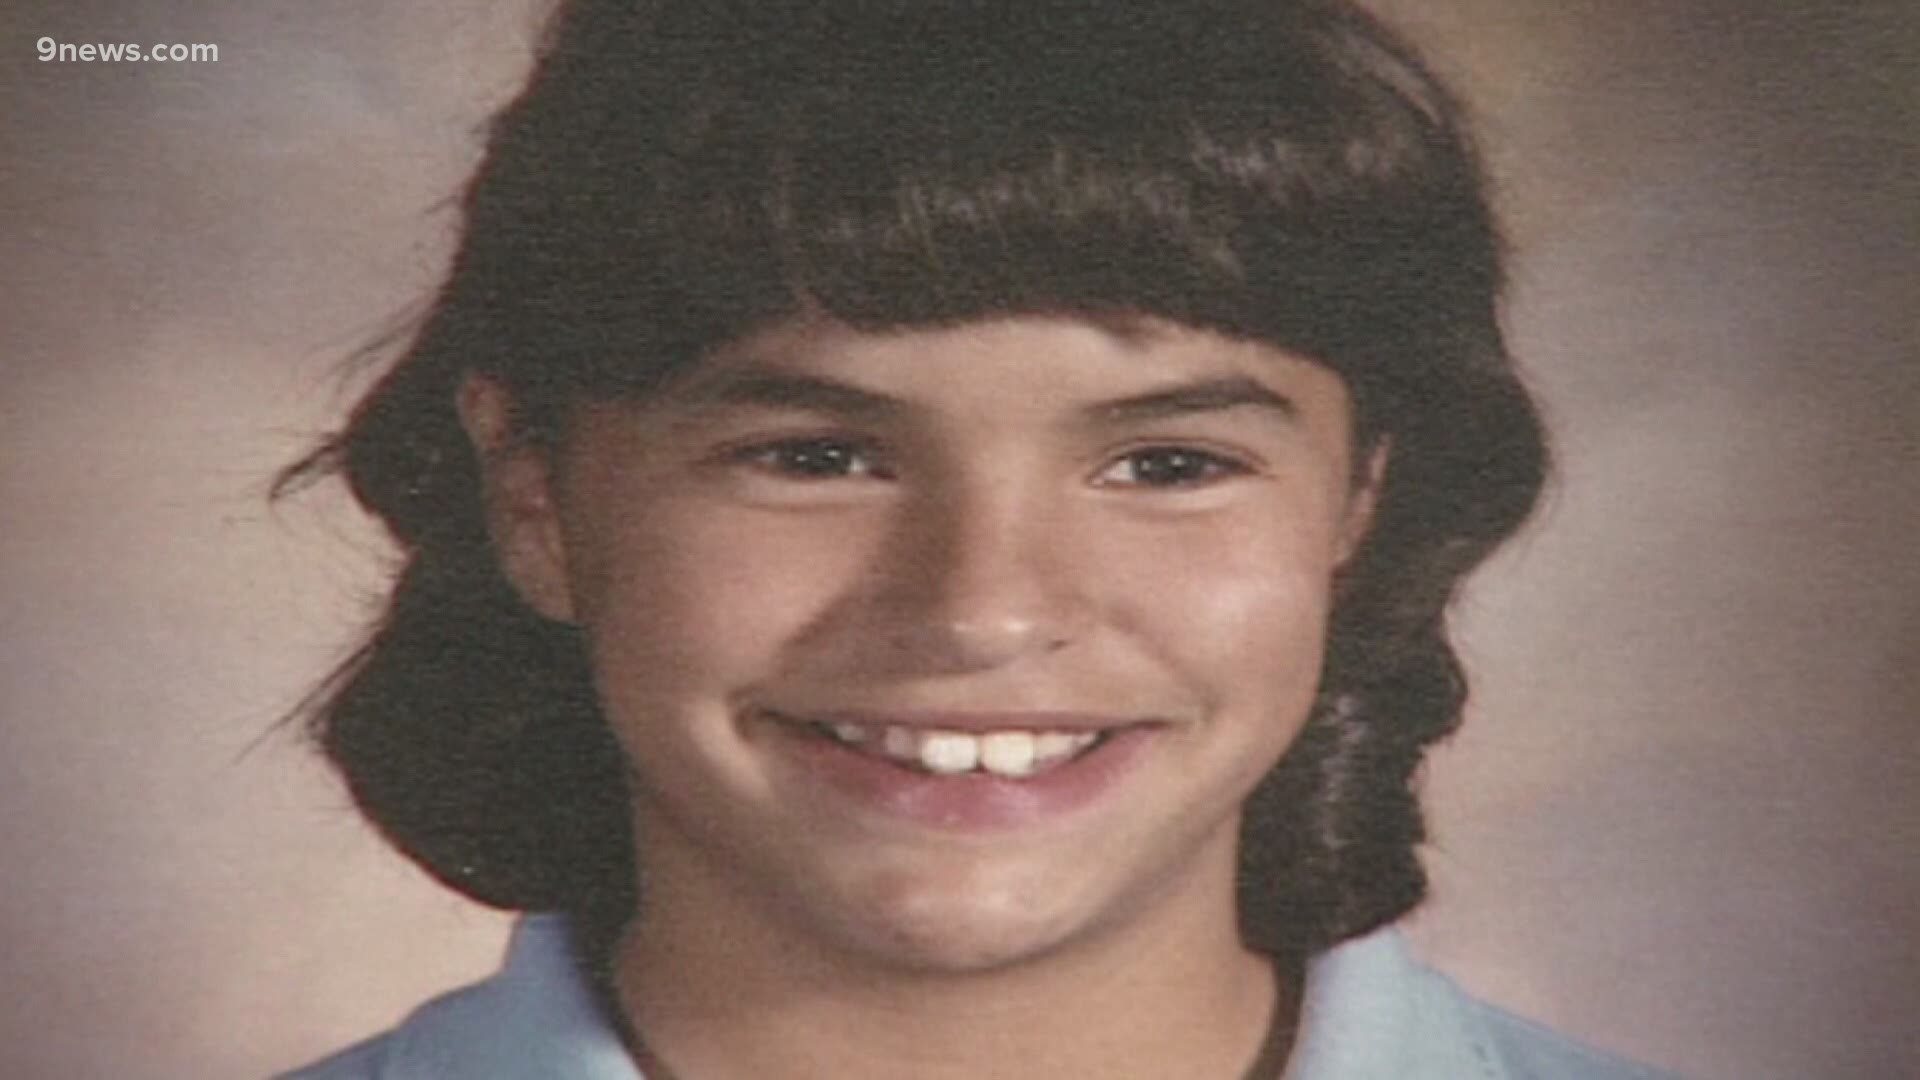 The 12-year-old went missing in 1984 and was missing for more than three decades before her remains were found.